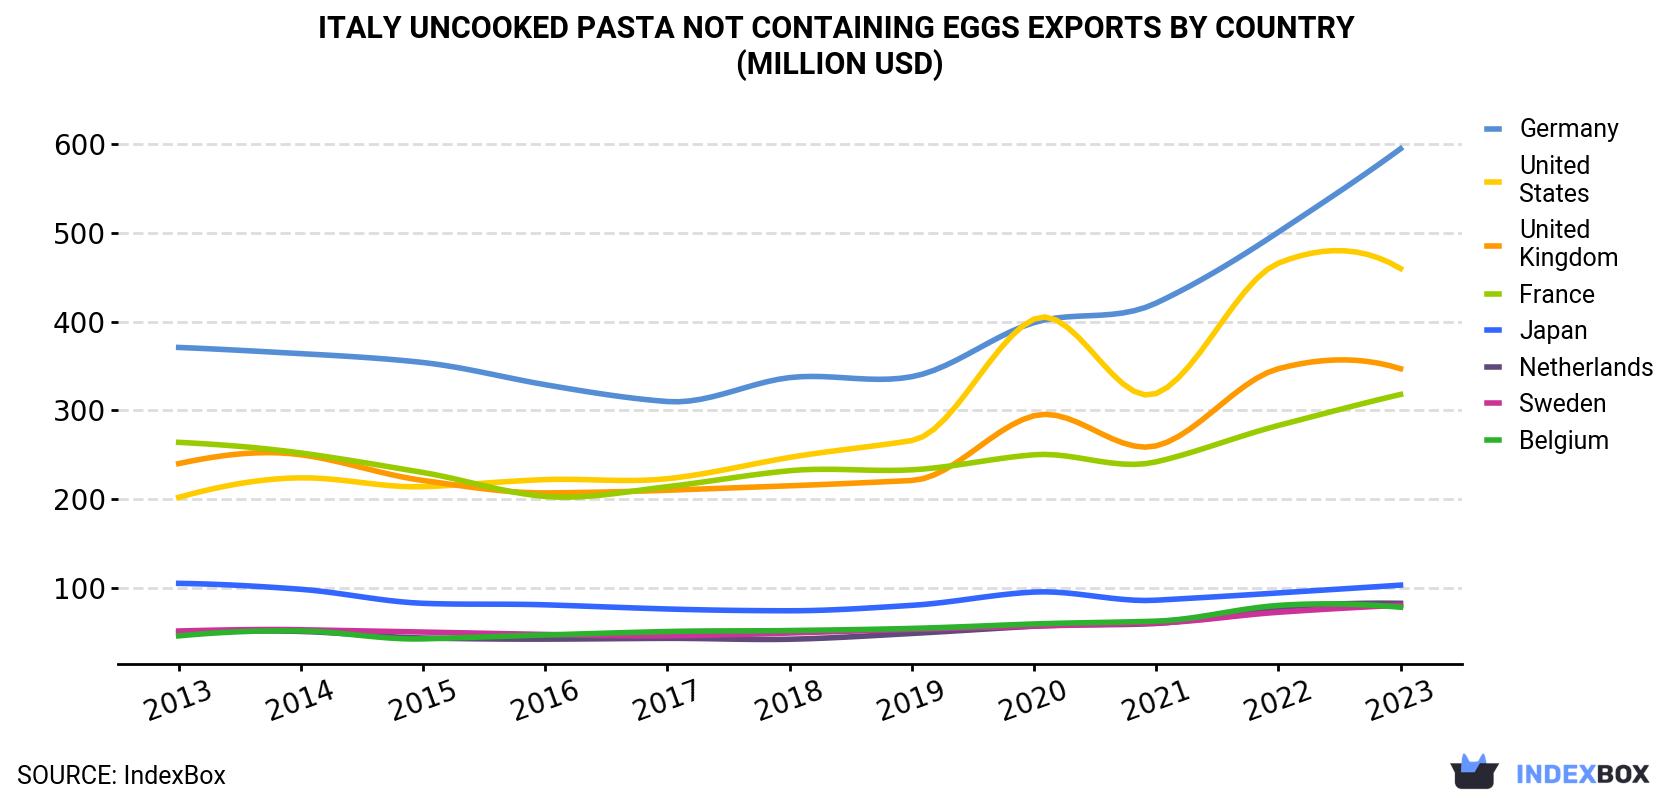 Italy Uncooked Pasta not Containing Eggs Exports By Country (Million USD)